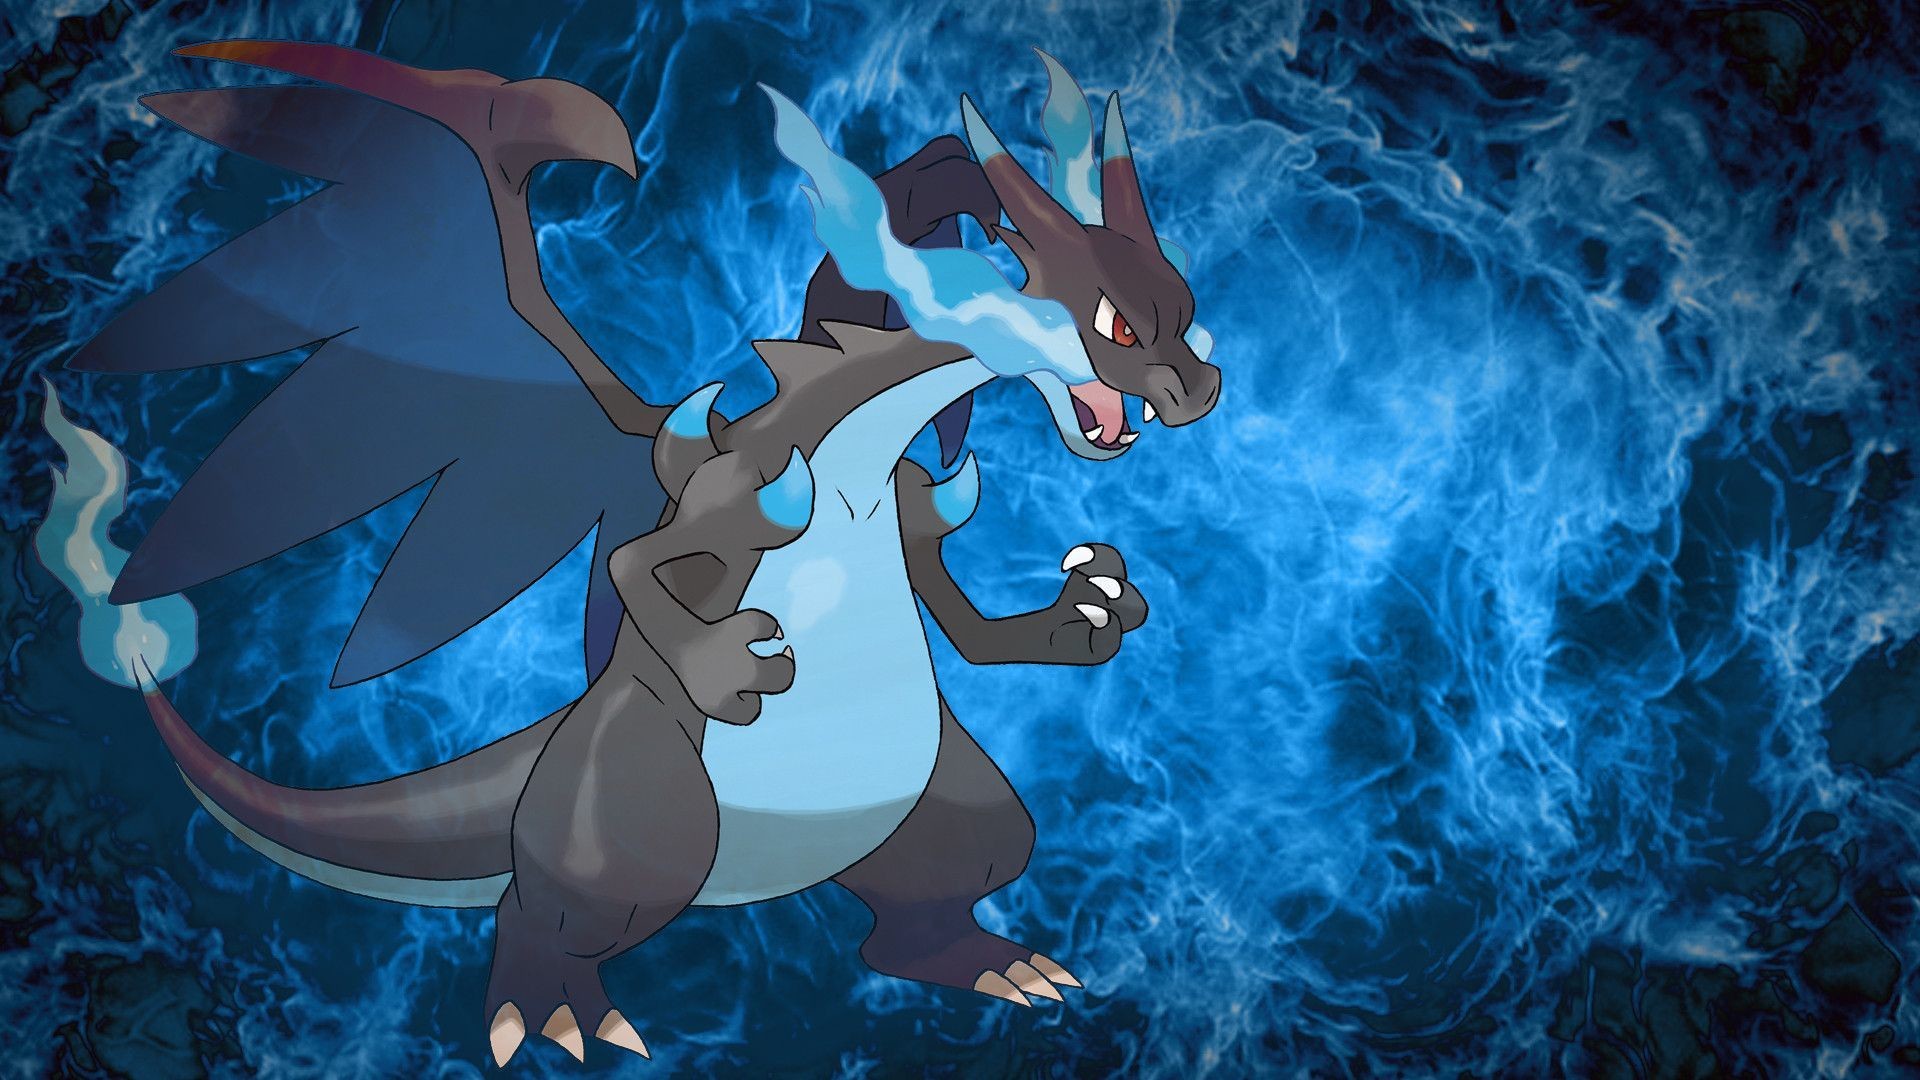 1920x1080 Search Results for “mega charizard wallpaper iphone” – Adorable Wallpapers